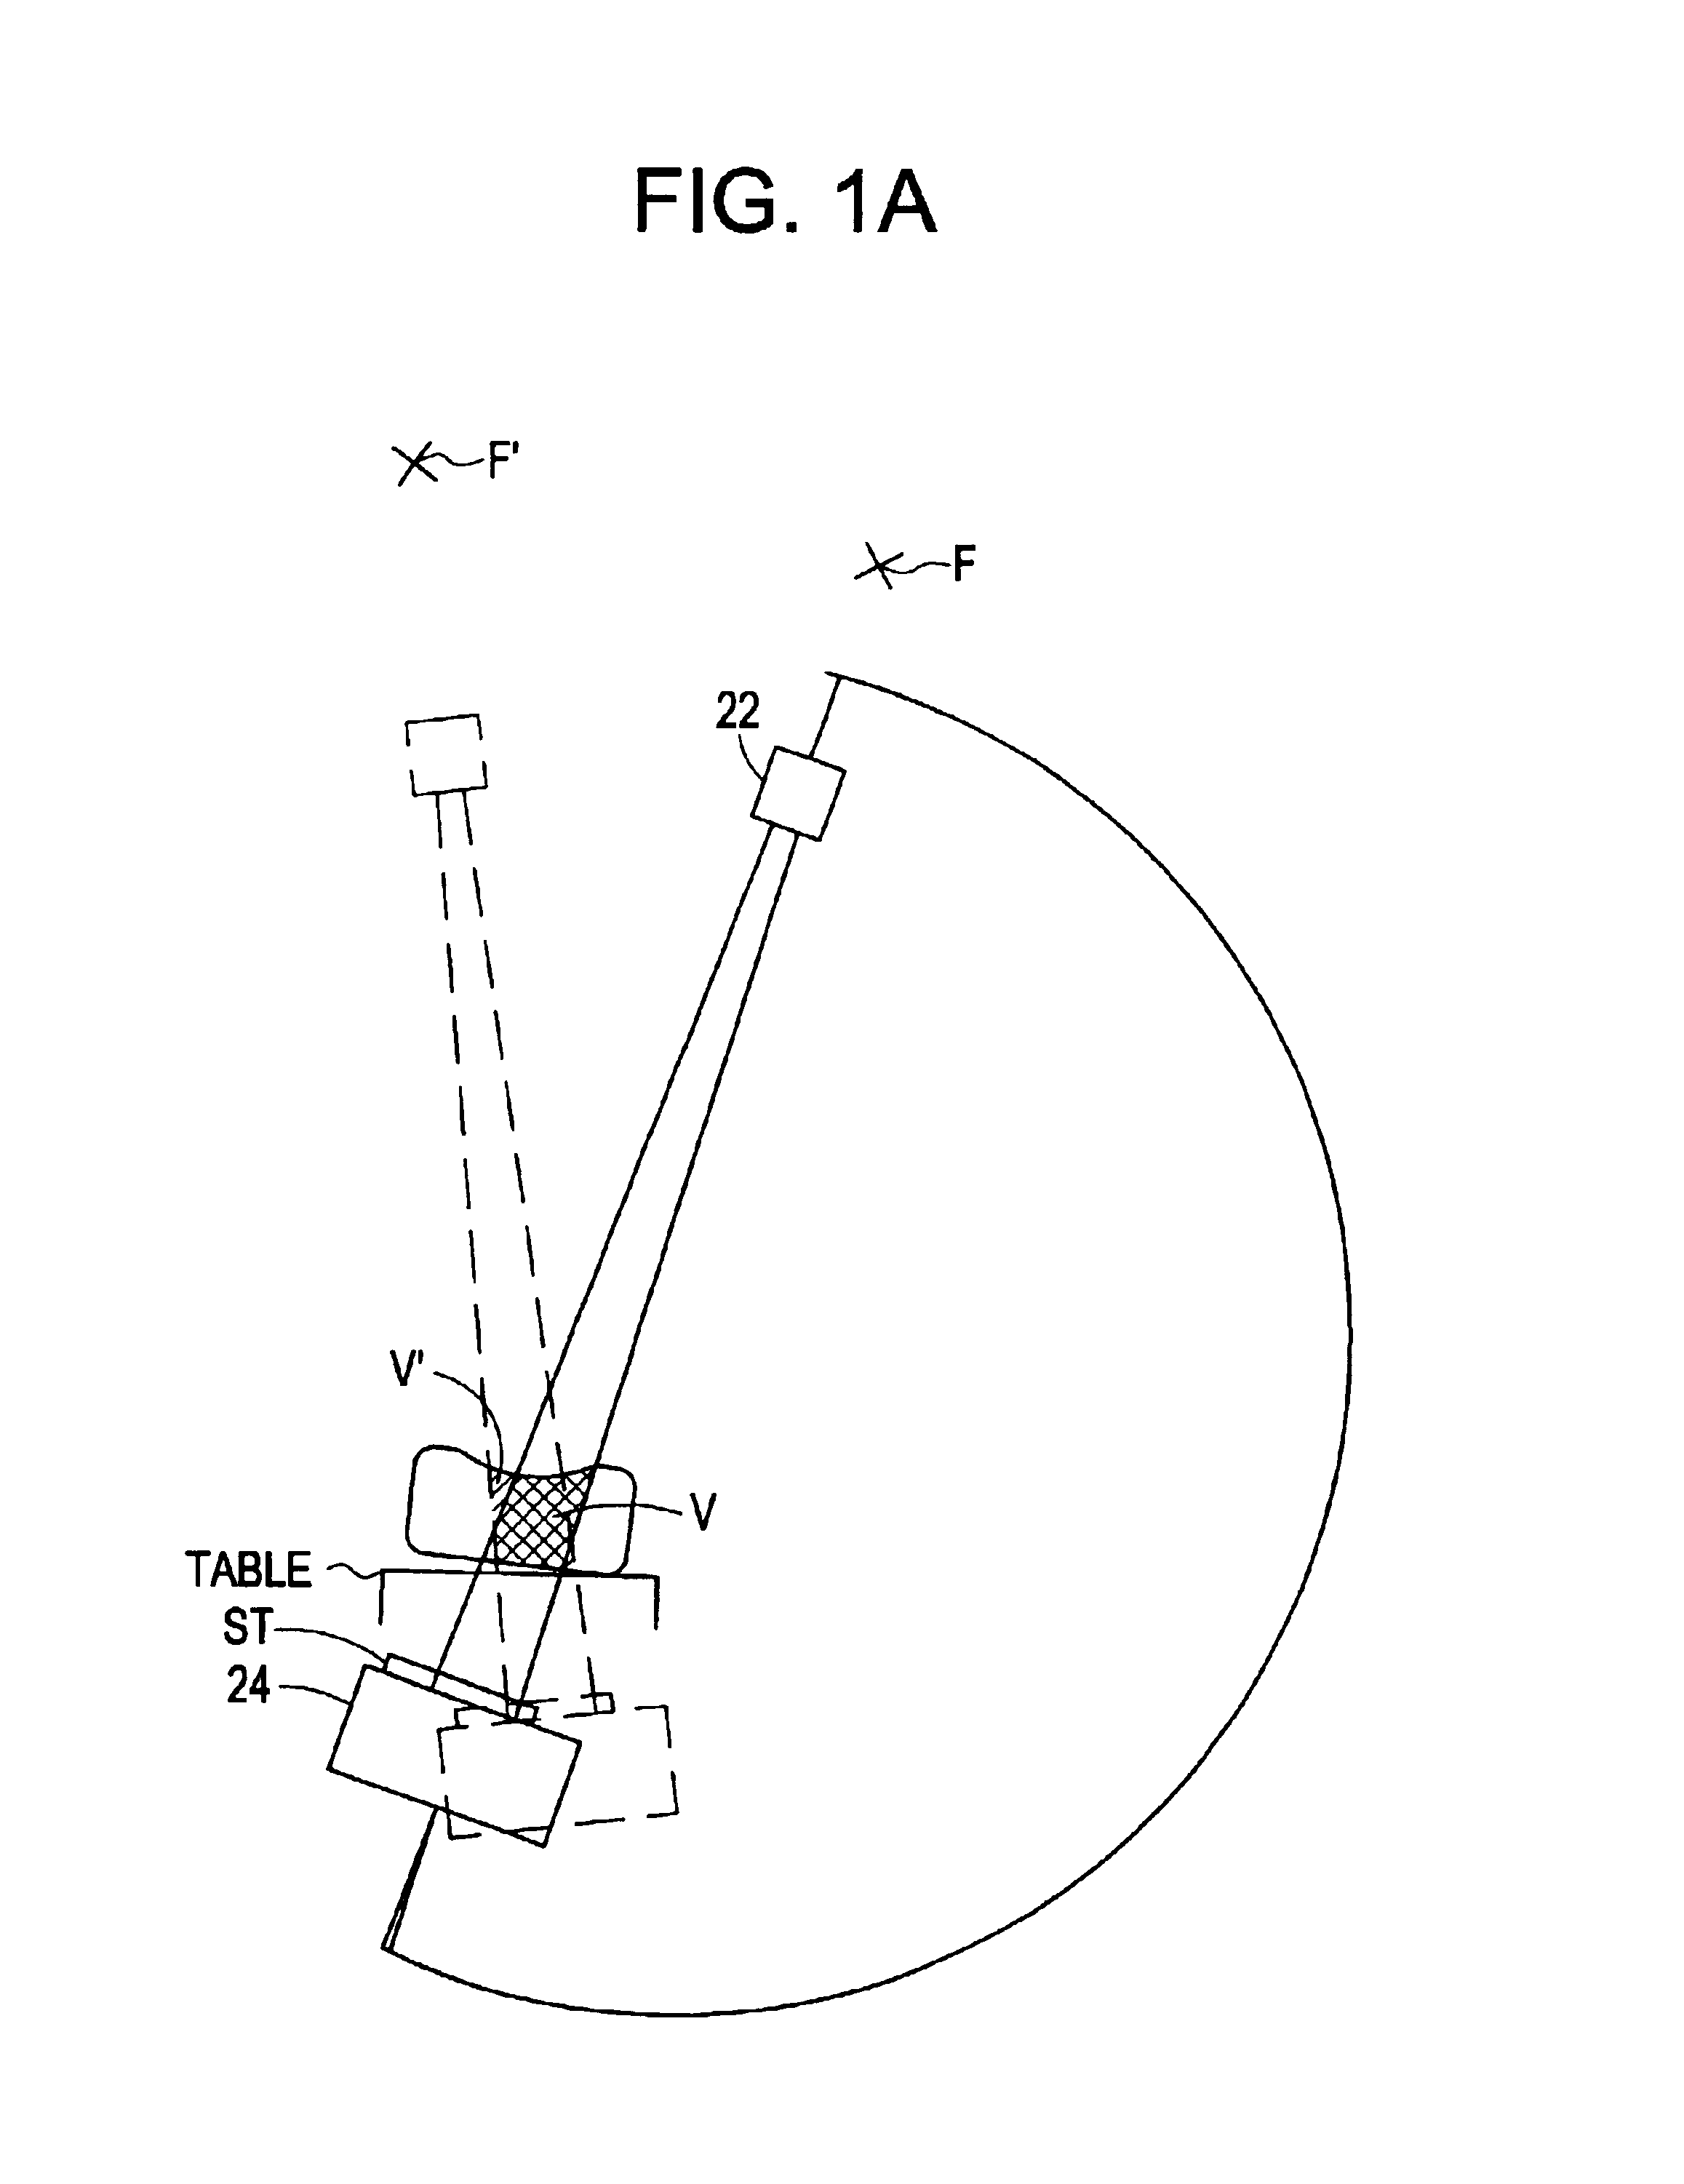 Fluoroscopic tracking and visualization system